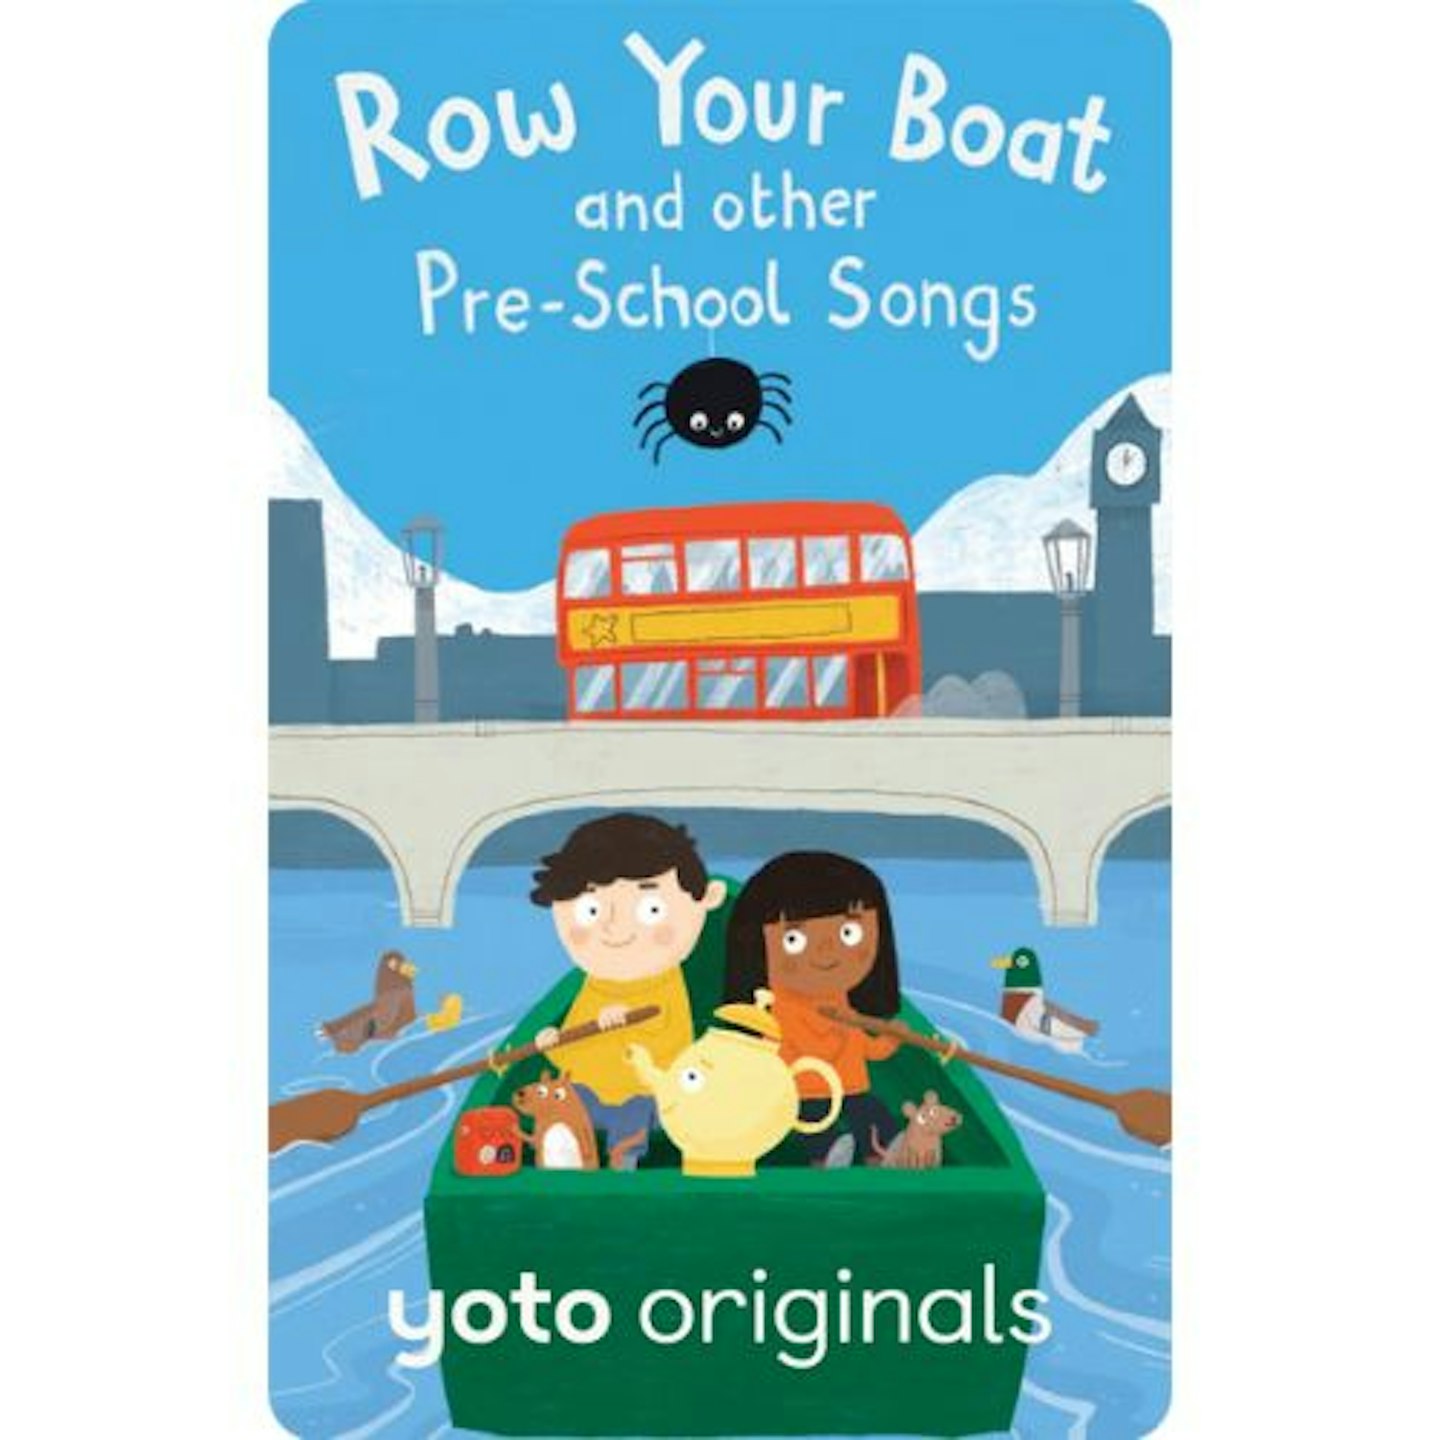 Best Yoto cards for toddlers Row Your Boat and other Pe-School Songs